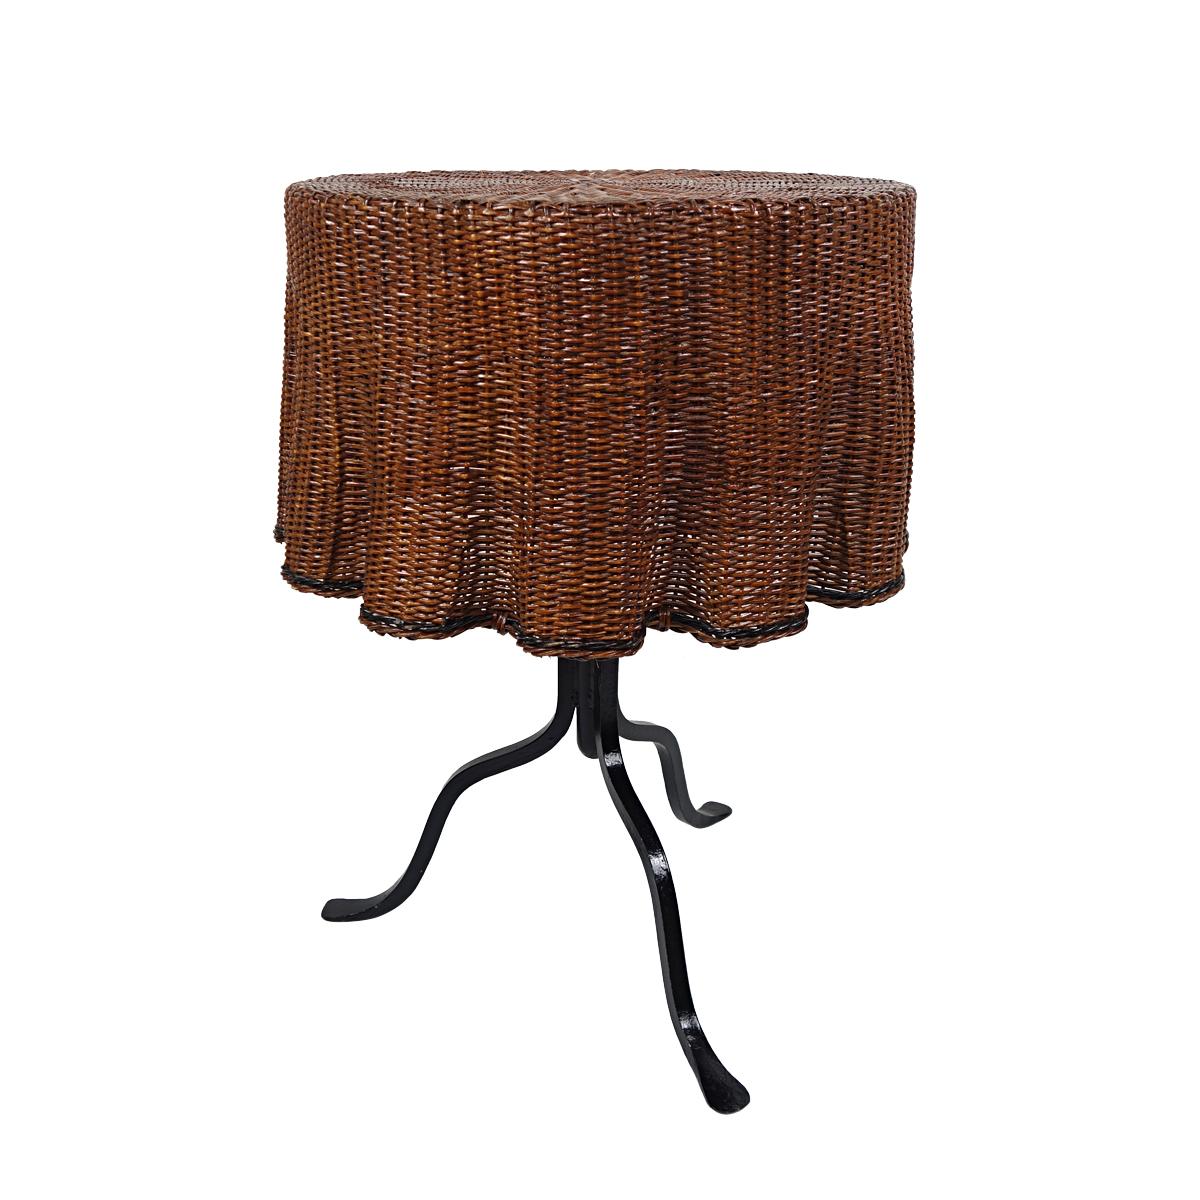 Rare iron cast coffee table with rattan top in the shape of a table cloth dating from the first half of the last century.
Optical illusion with a twist. That certainly goes for this very original heavily made table with stiffened table cloth. This